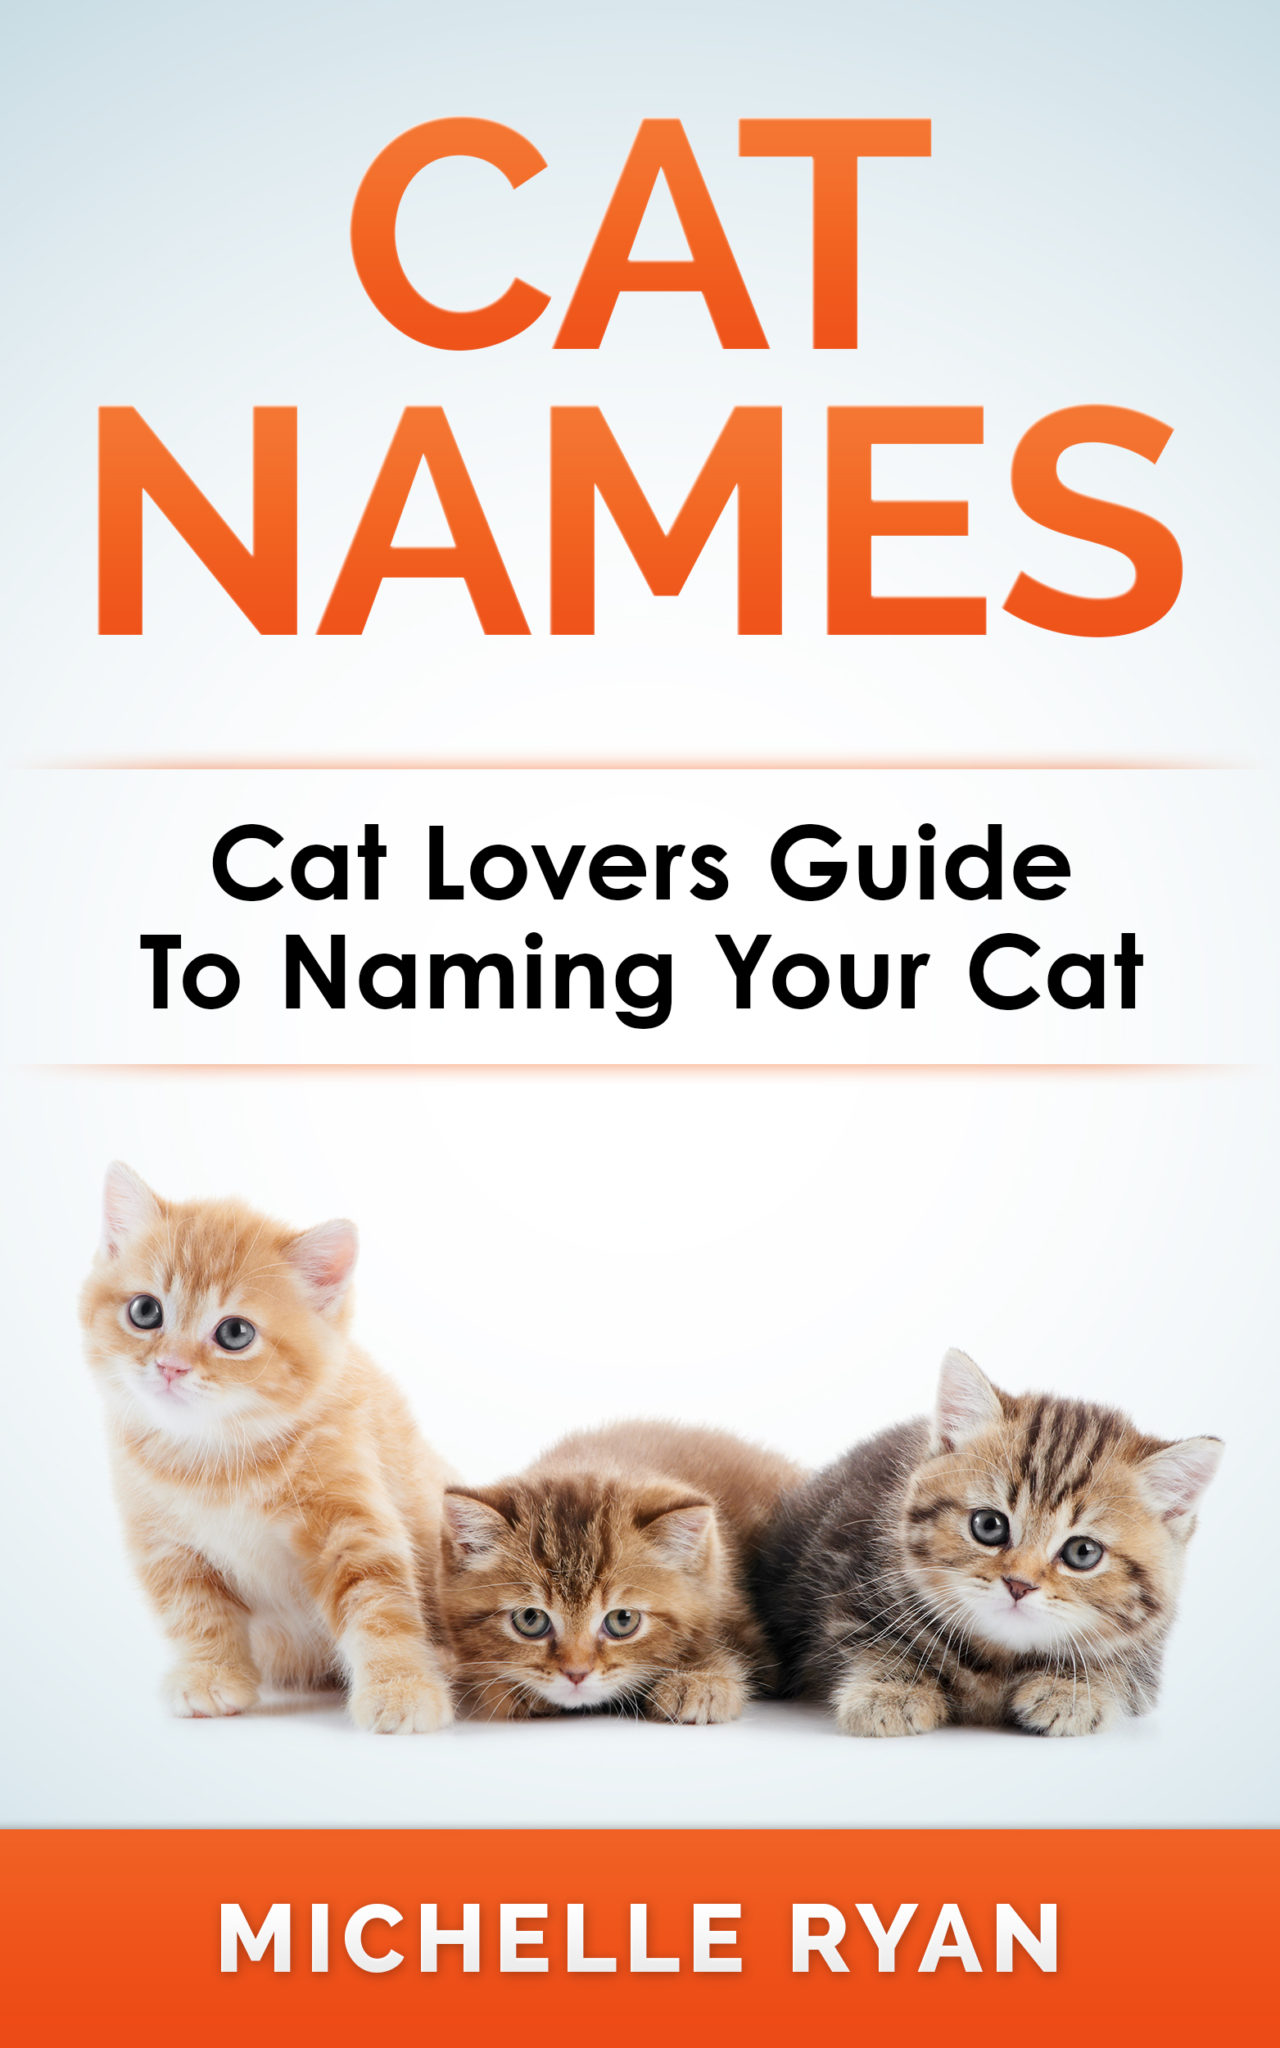 FREE: Cat Names: Cat Lovers Guide To Naming Your Cat by Michelle Ryan